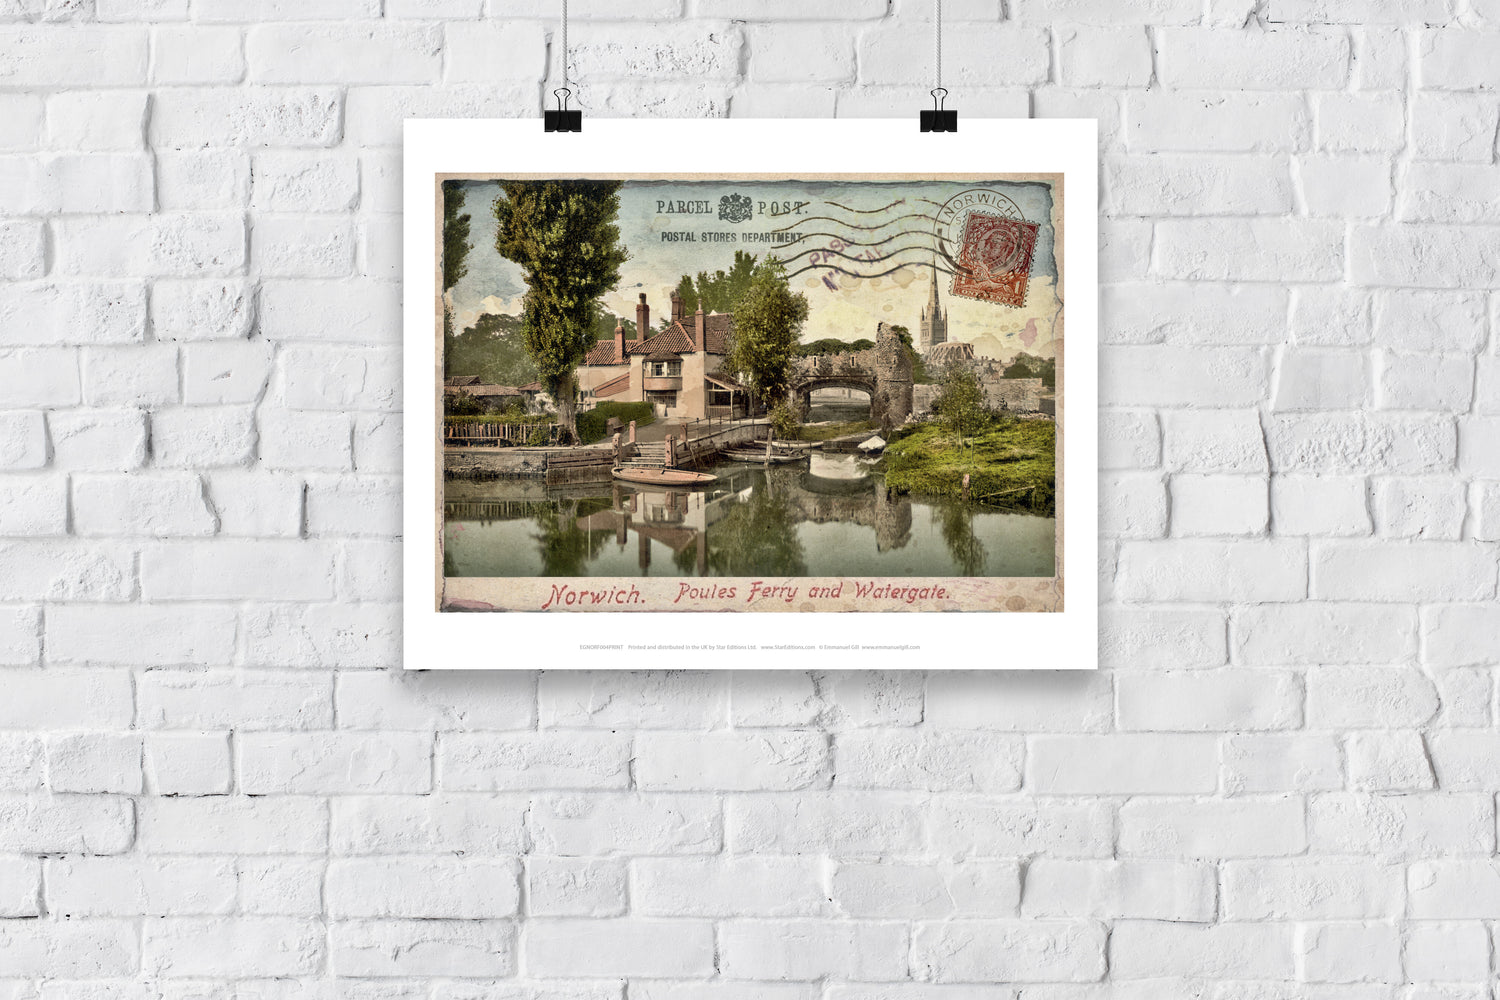 Poules Ferry and Watergate, Norwich - Art Print